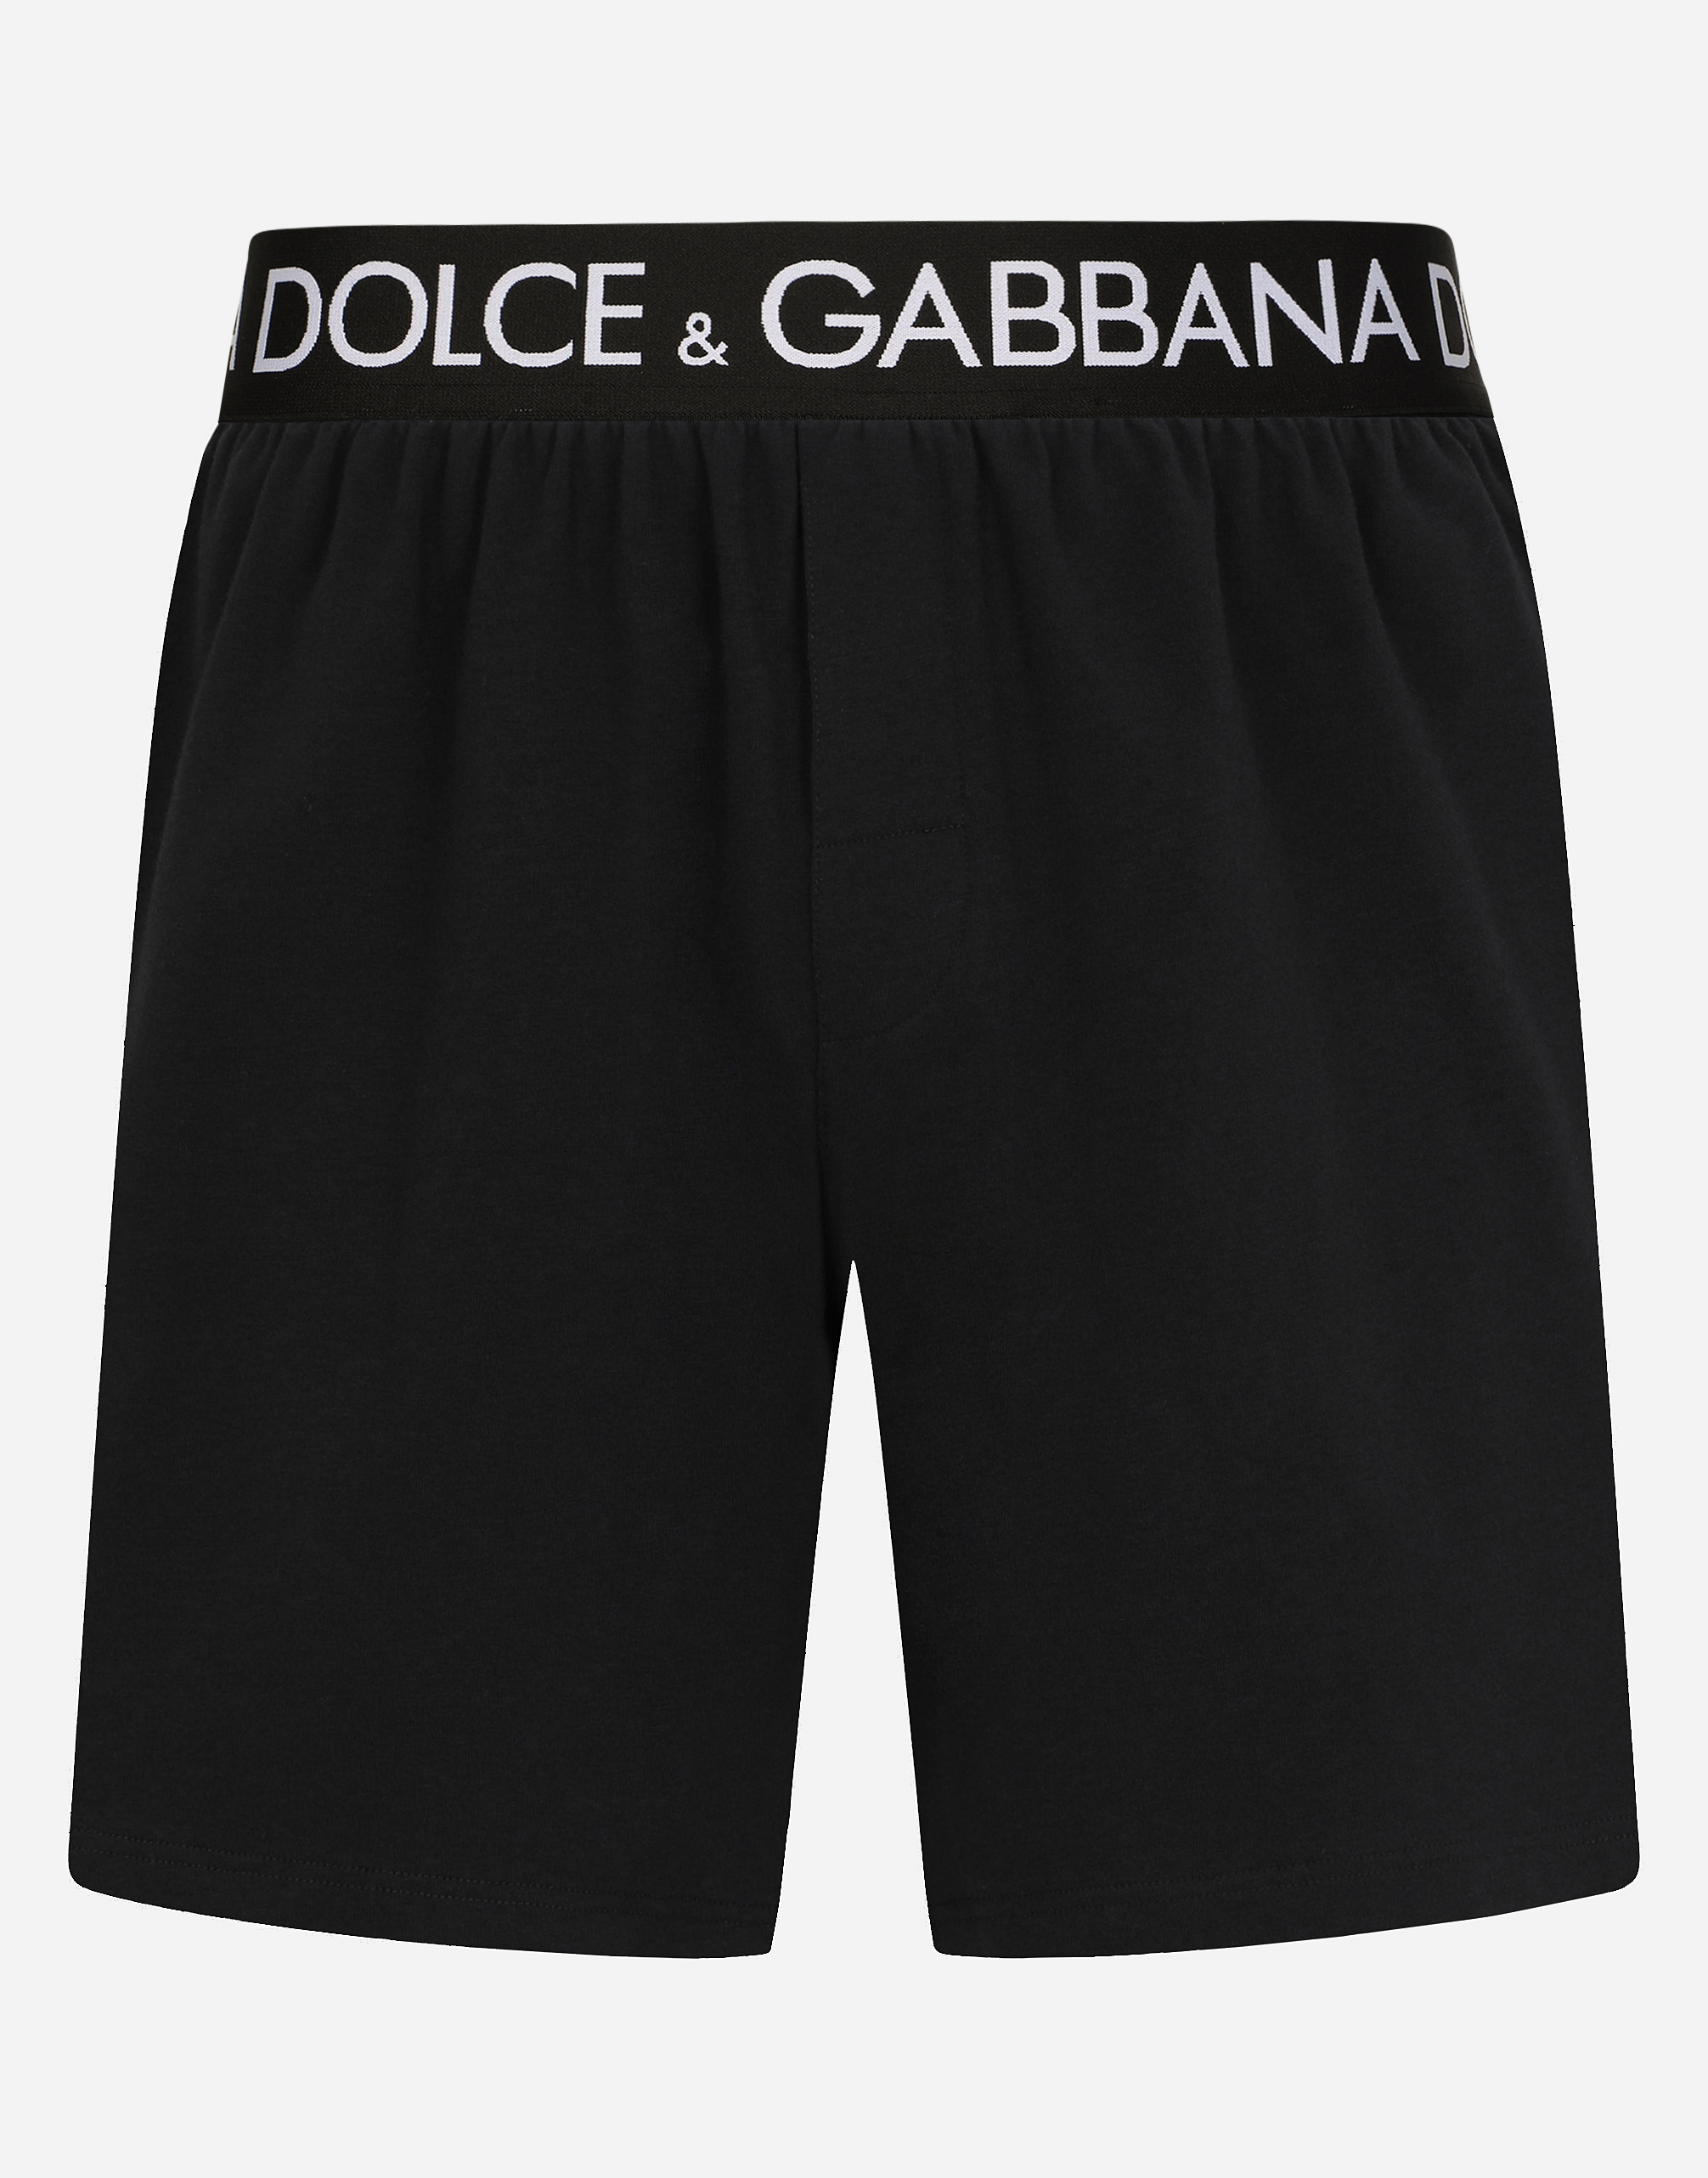 Two-way stretch cotton boxer shorts in Black